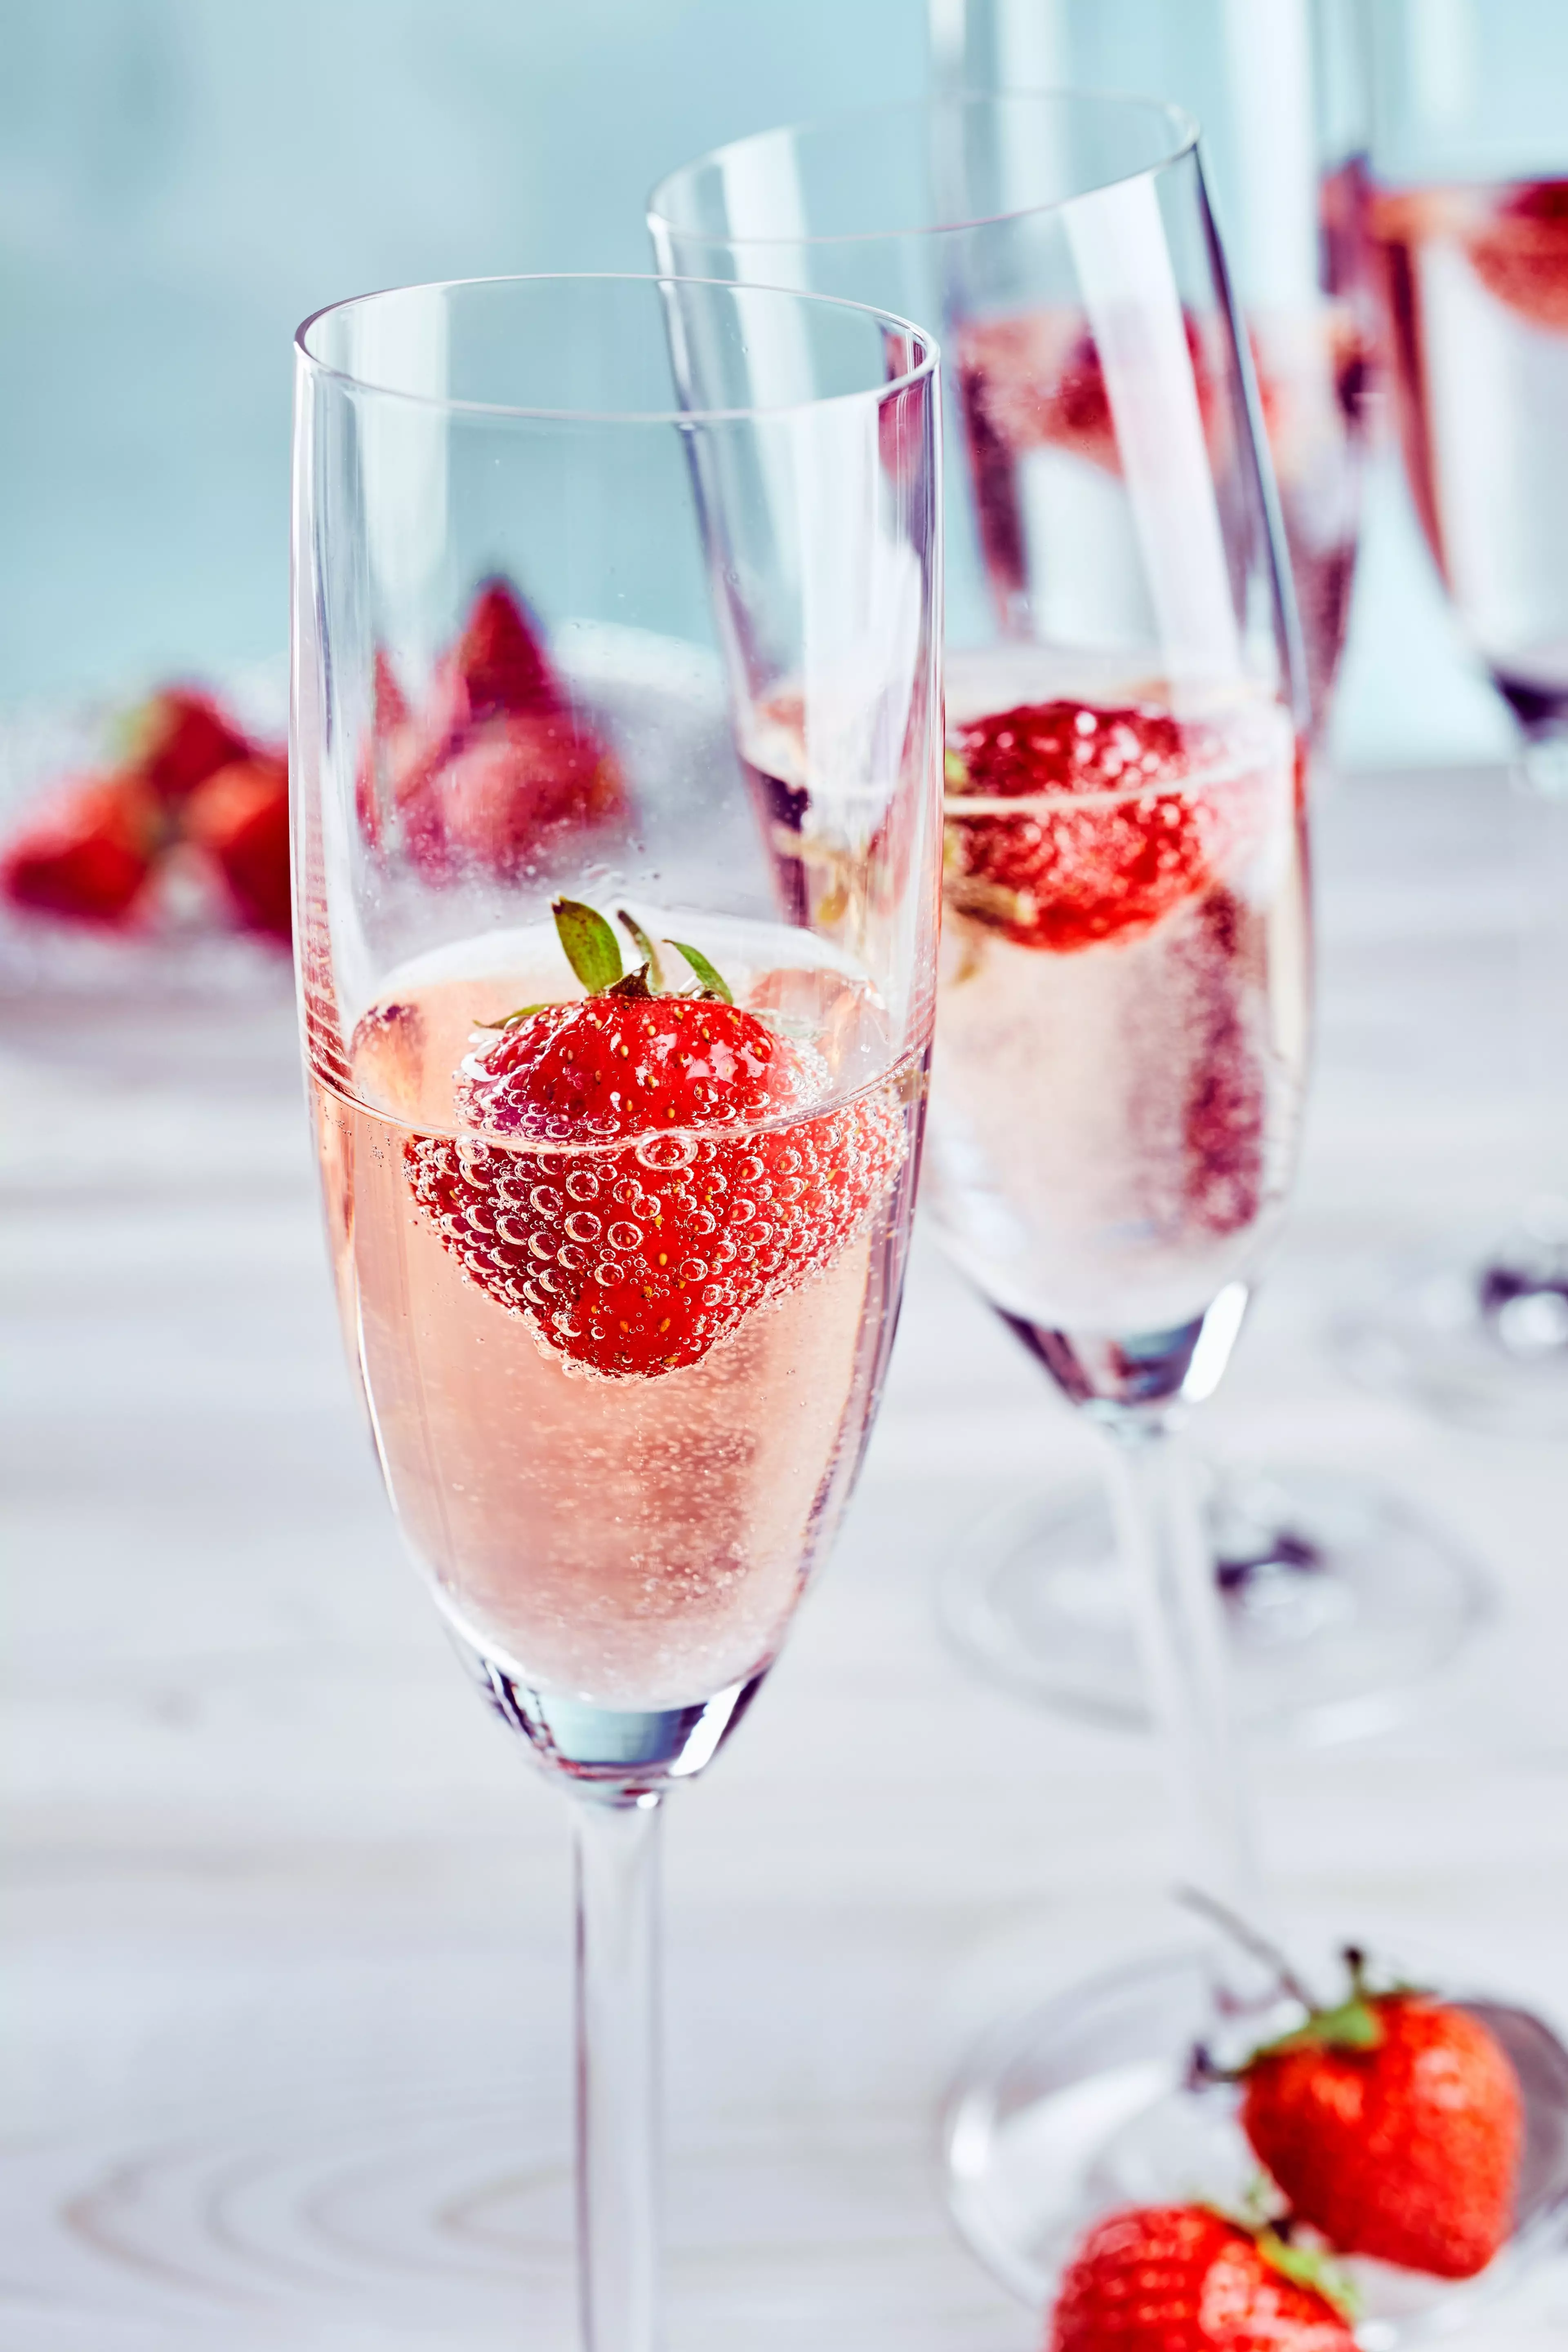 Strawberry and prosecco is the ultimate combo' (